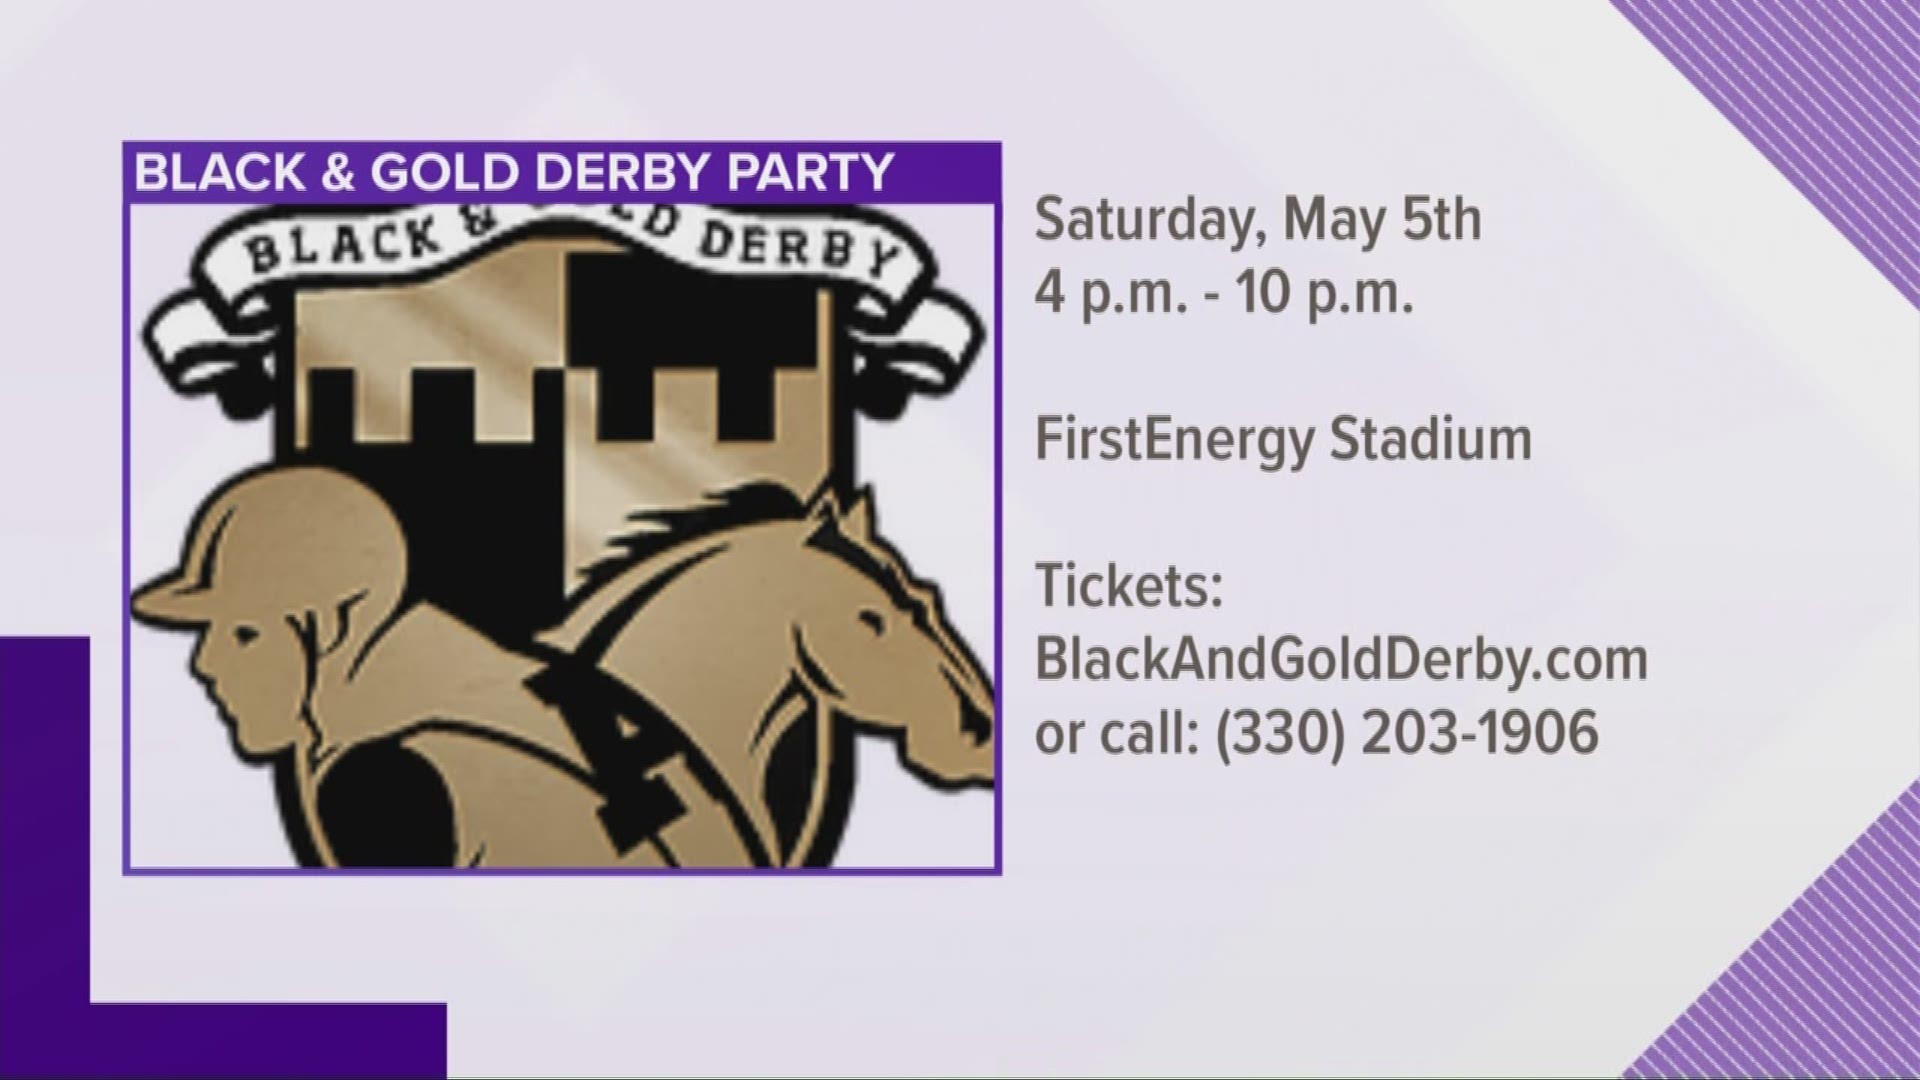 Black and Gold Derby set for May 5 at FirstEnergy Stadium